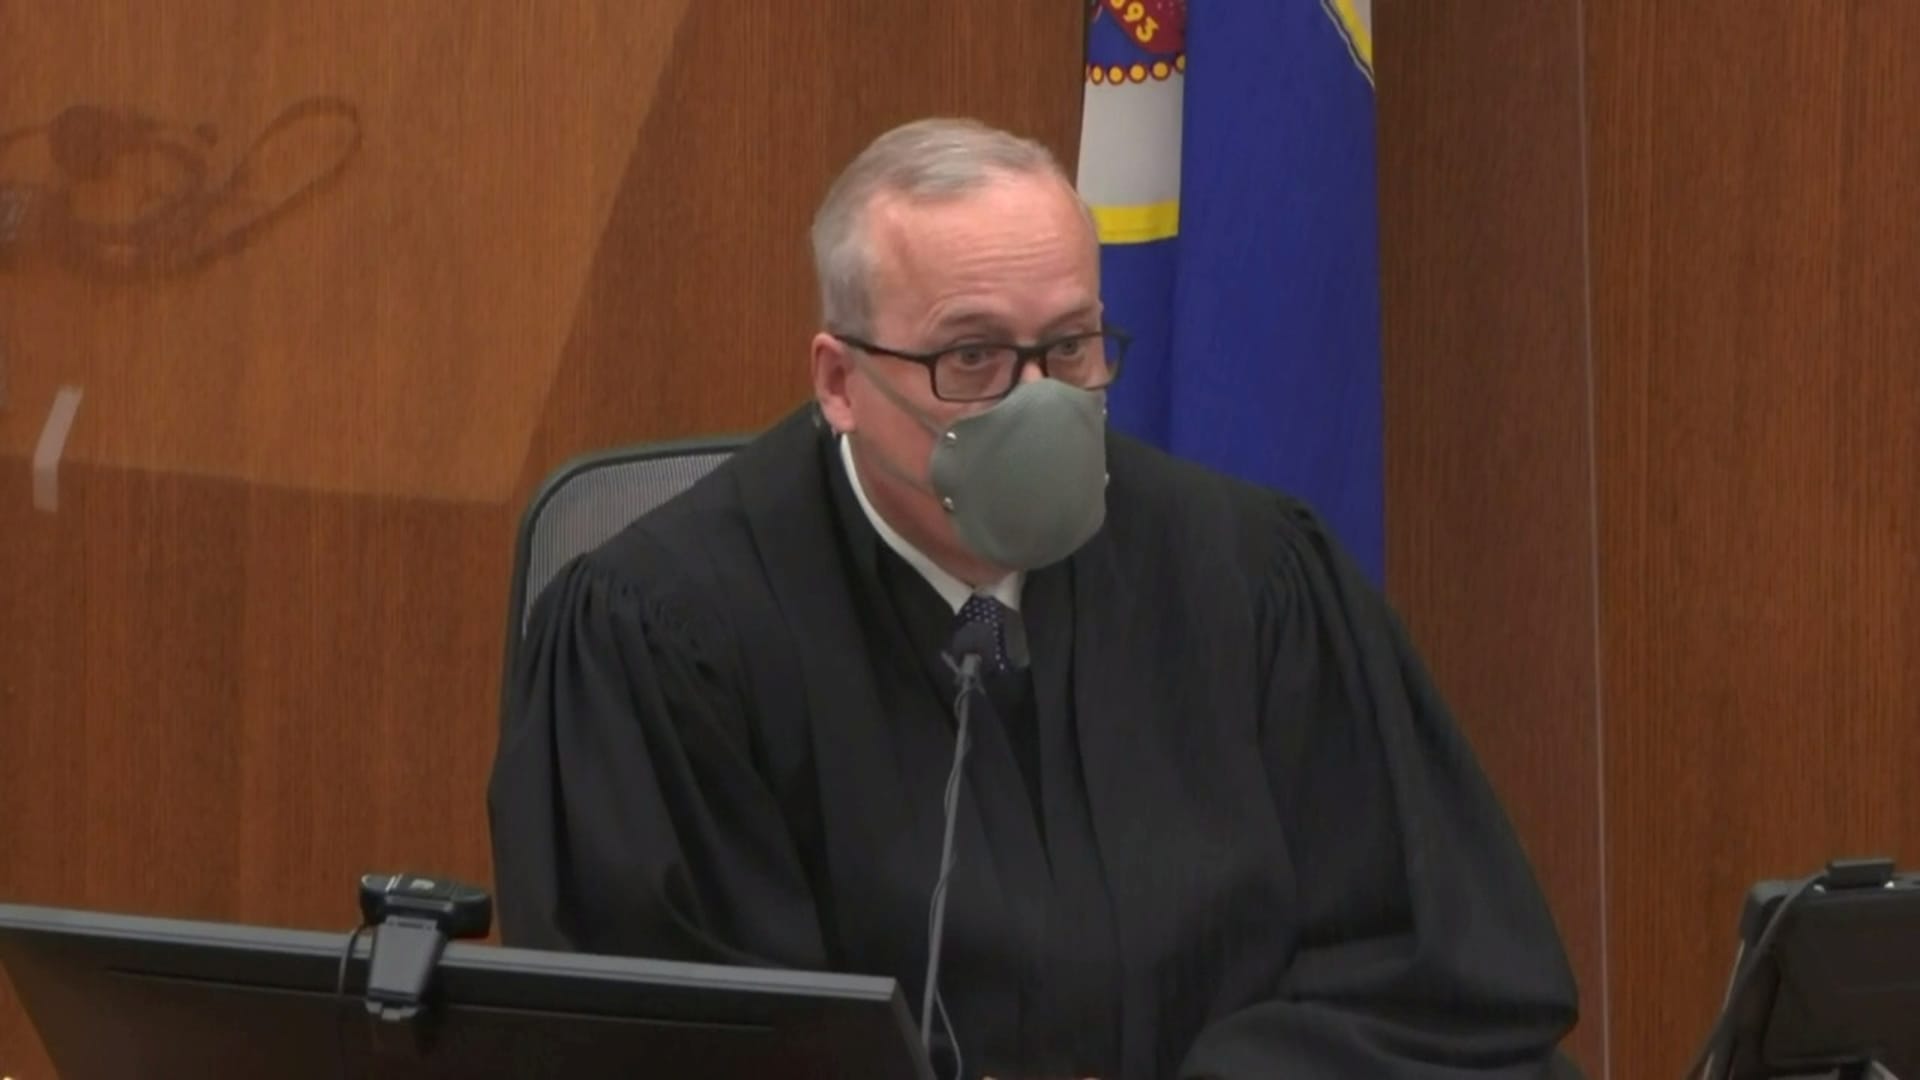 Hennepin County District Judge Peter Cahill gives instructions to the jury before opening arguments commence in the trial of former Minneapolis police officer Derek Chauvin for second-degree murder, third-degree murder and second-degree manslaughter in the death of George Floyd in Minneapolis, Minnesota, U.S. March 29, 2021 in a still image from video.